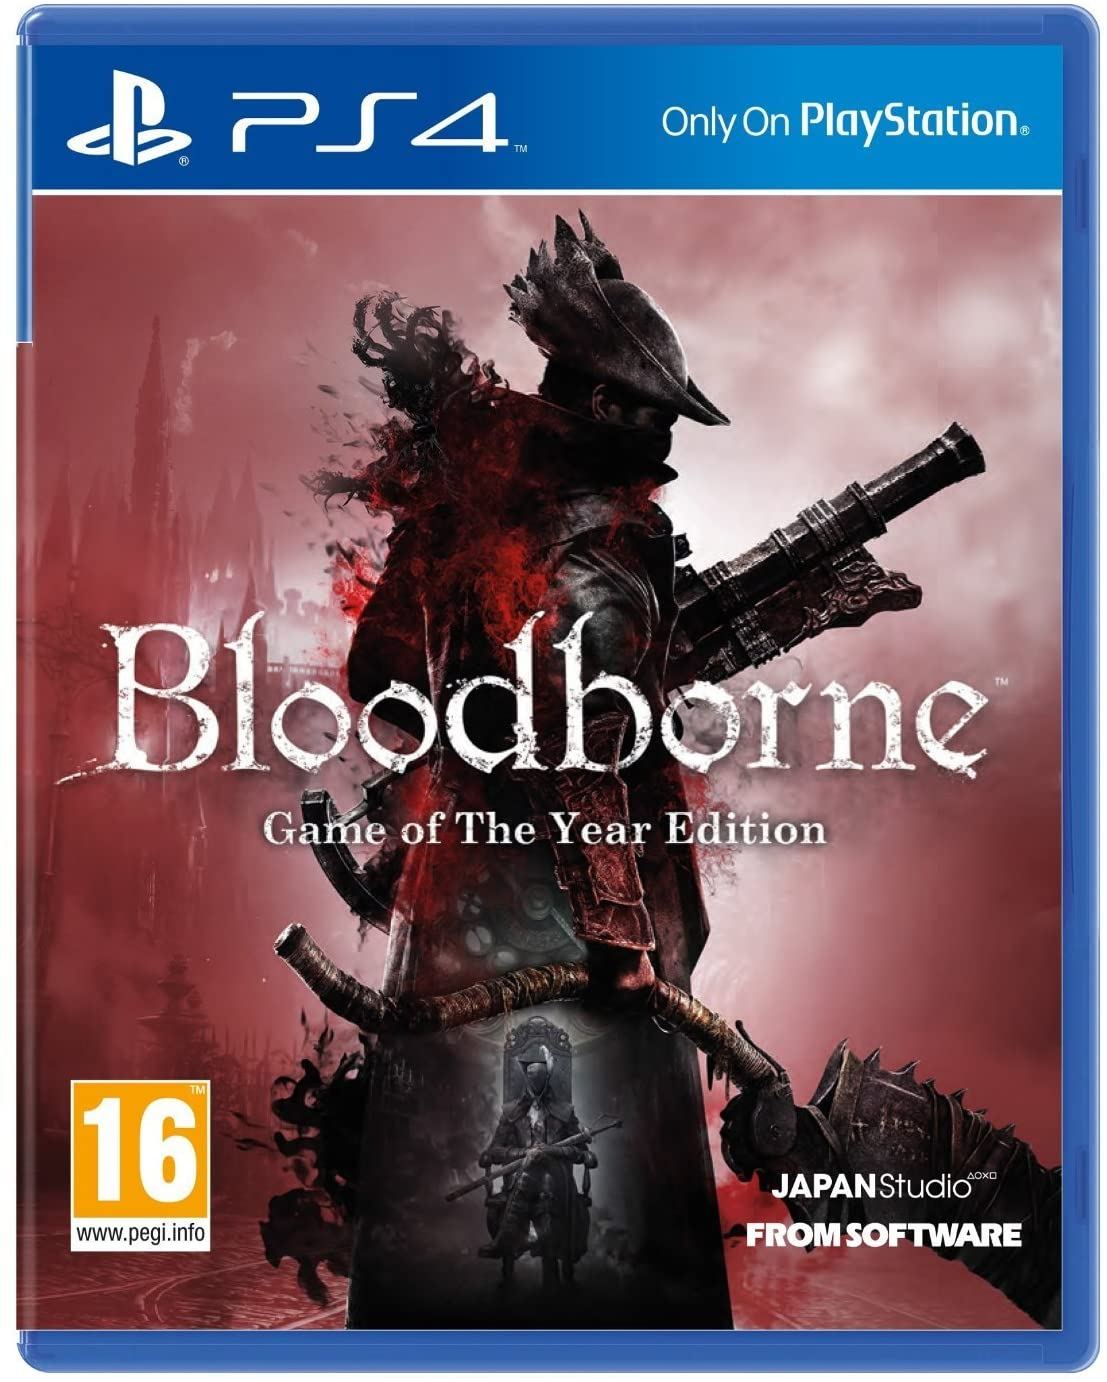 PlayStation's Expansion to PC May Exclude Games Like Bloodborne